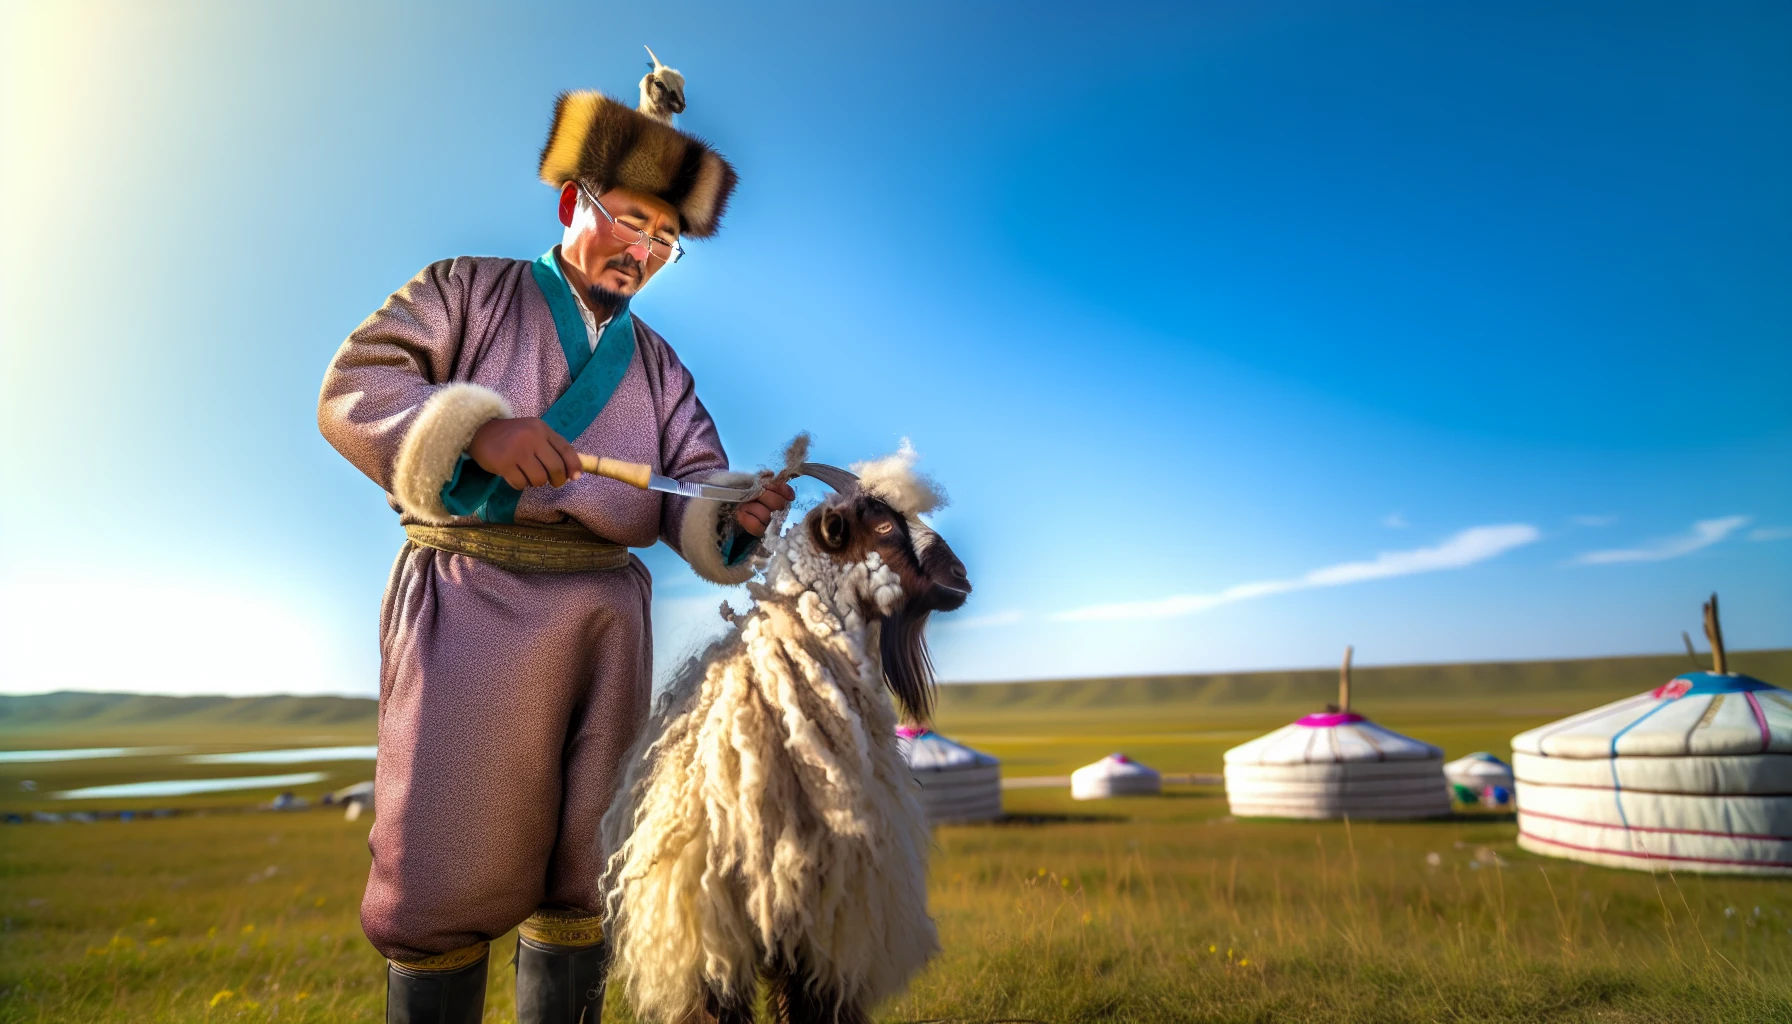 Combing cashmere goats in the Mongolian countryside